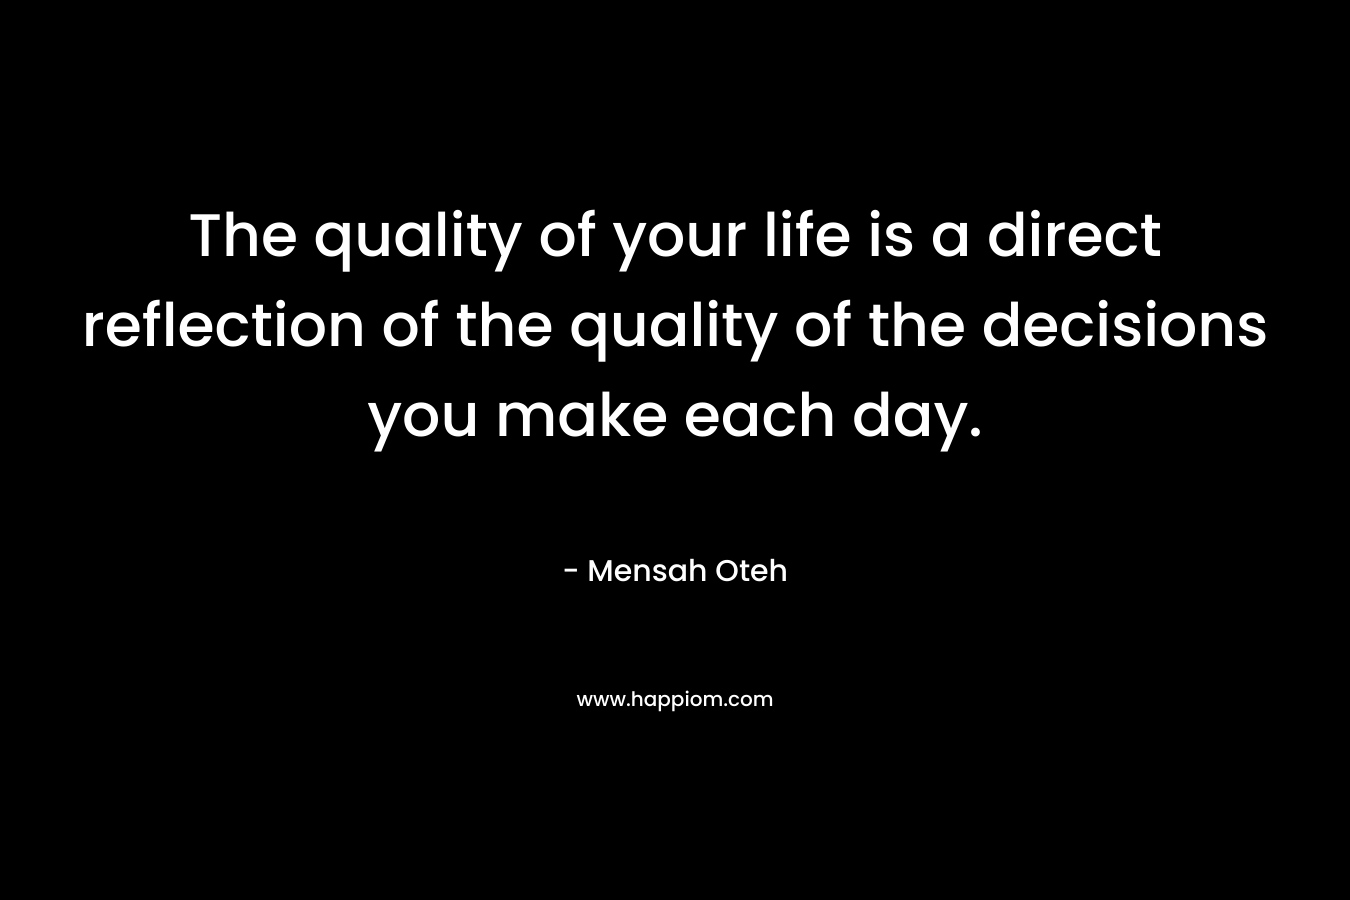 The quality of your life is a direct reflection of the quality of the decisions you make each day.